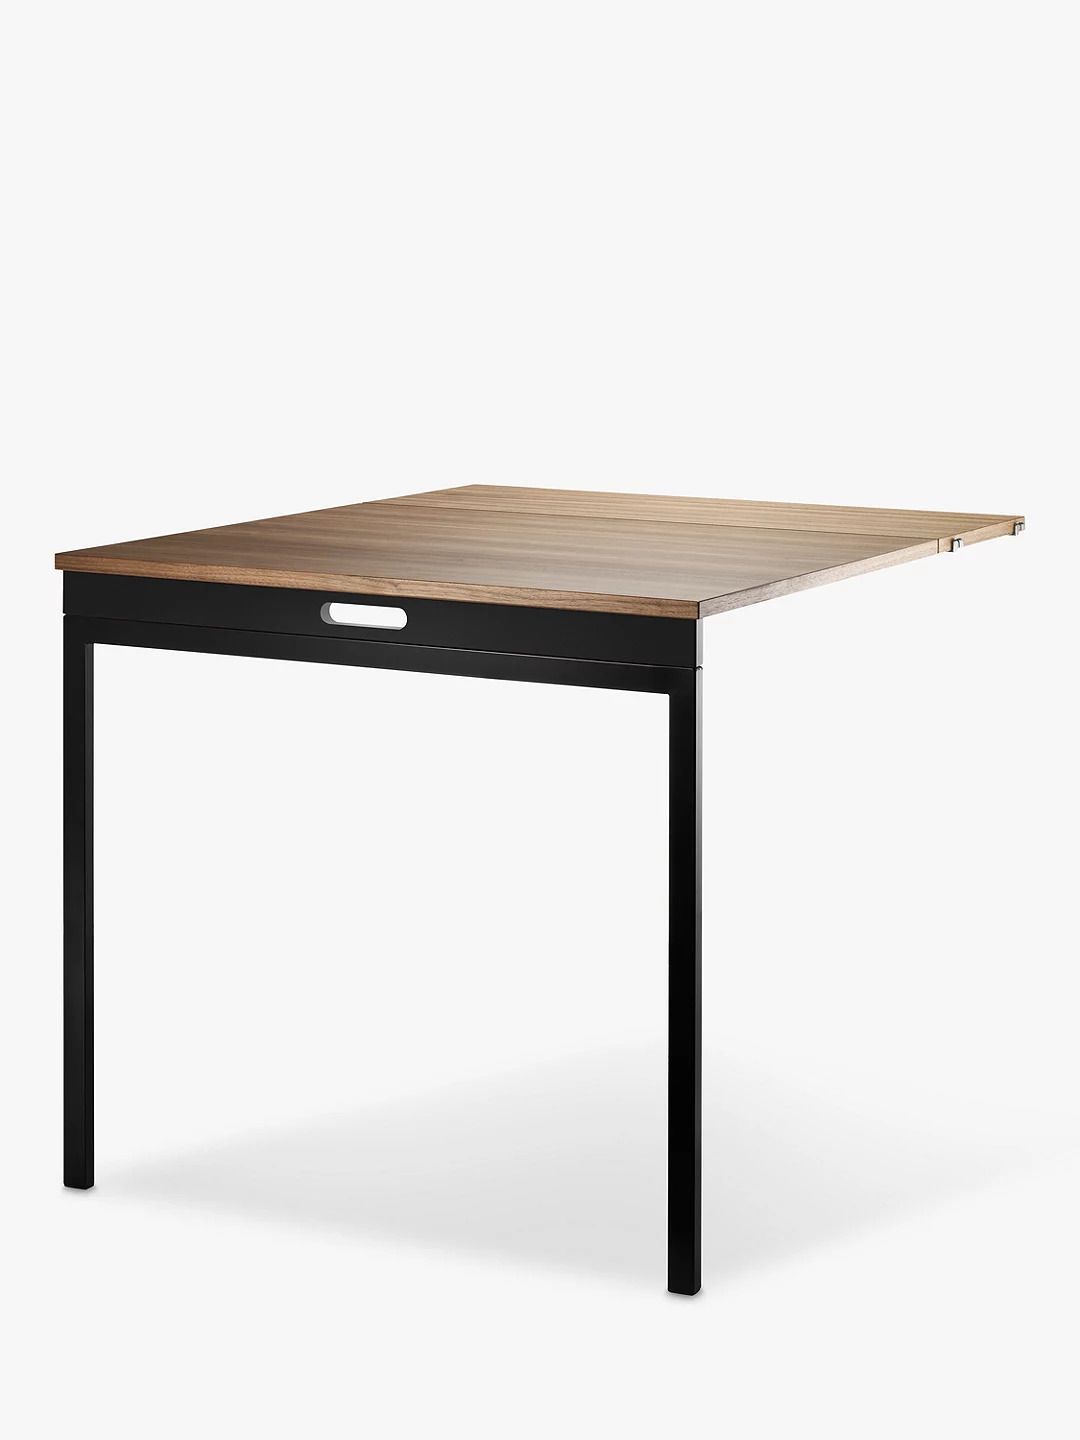 24 Best Folding Desks For Ongoing Wfh, Built In Bookcase With Fold Down Desk Legs